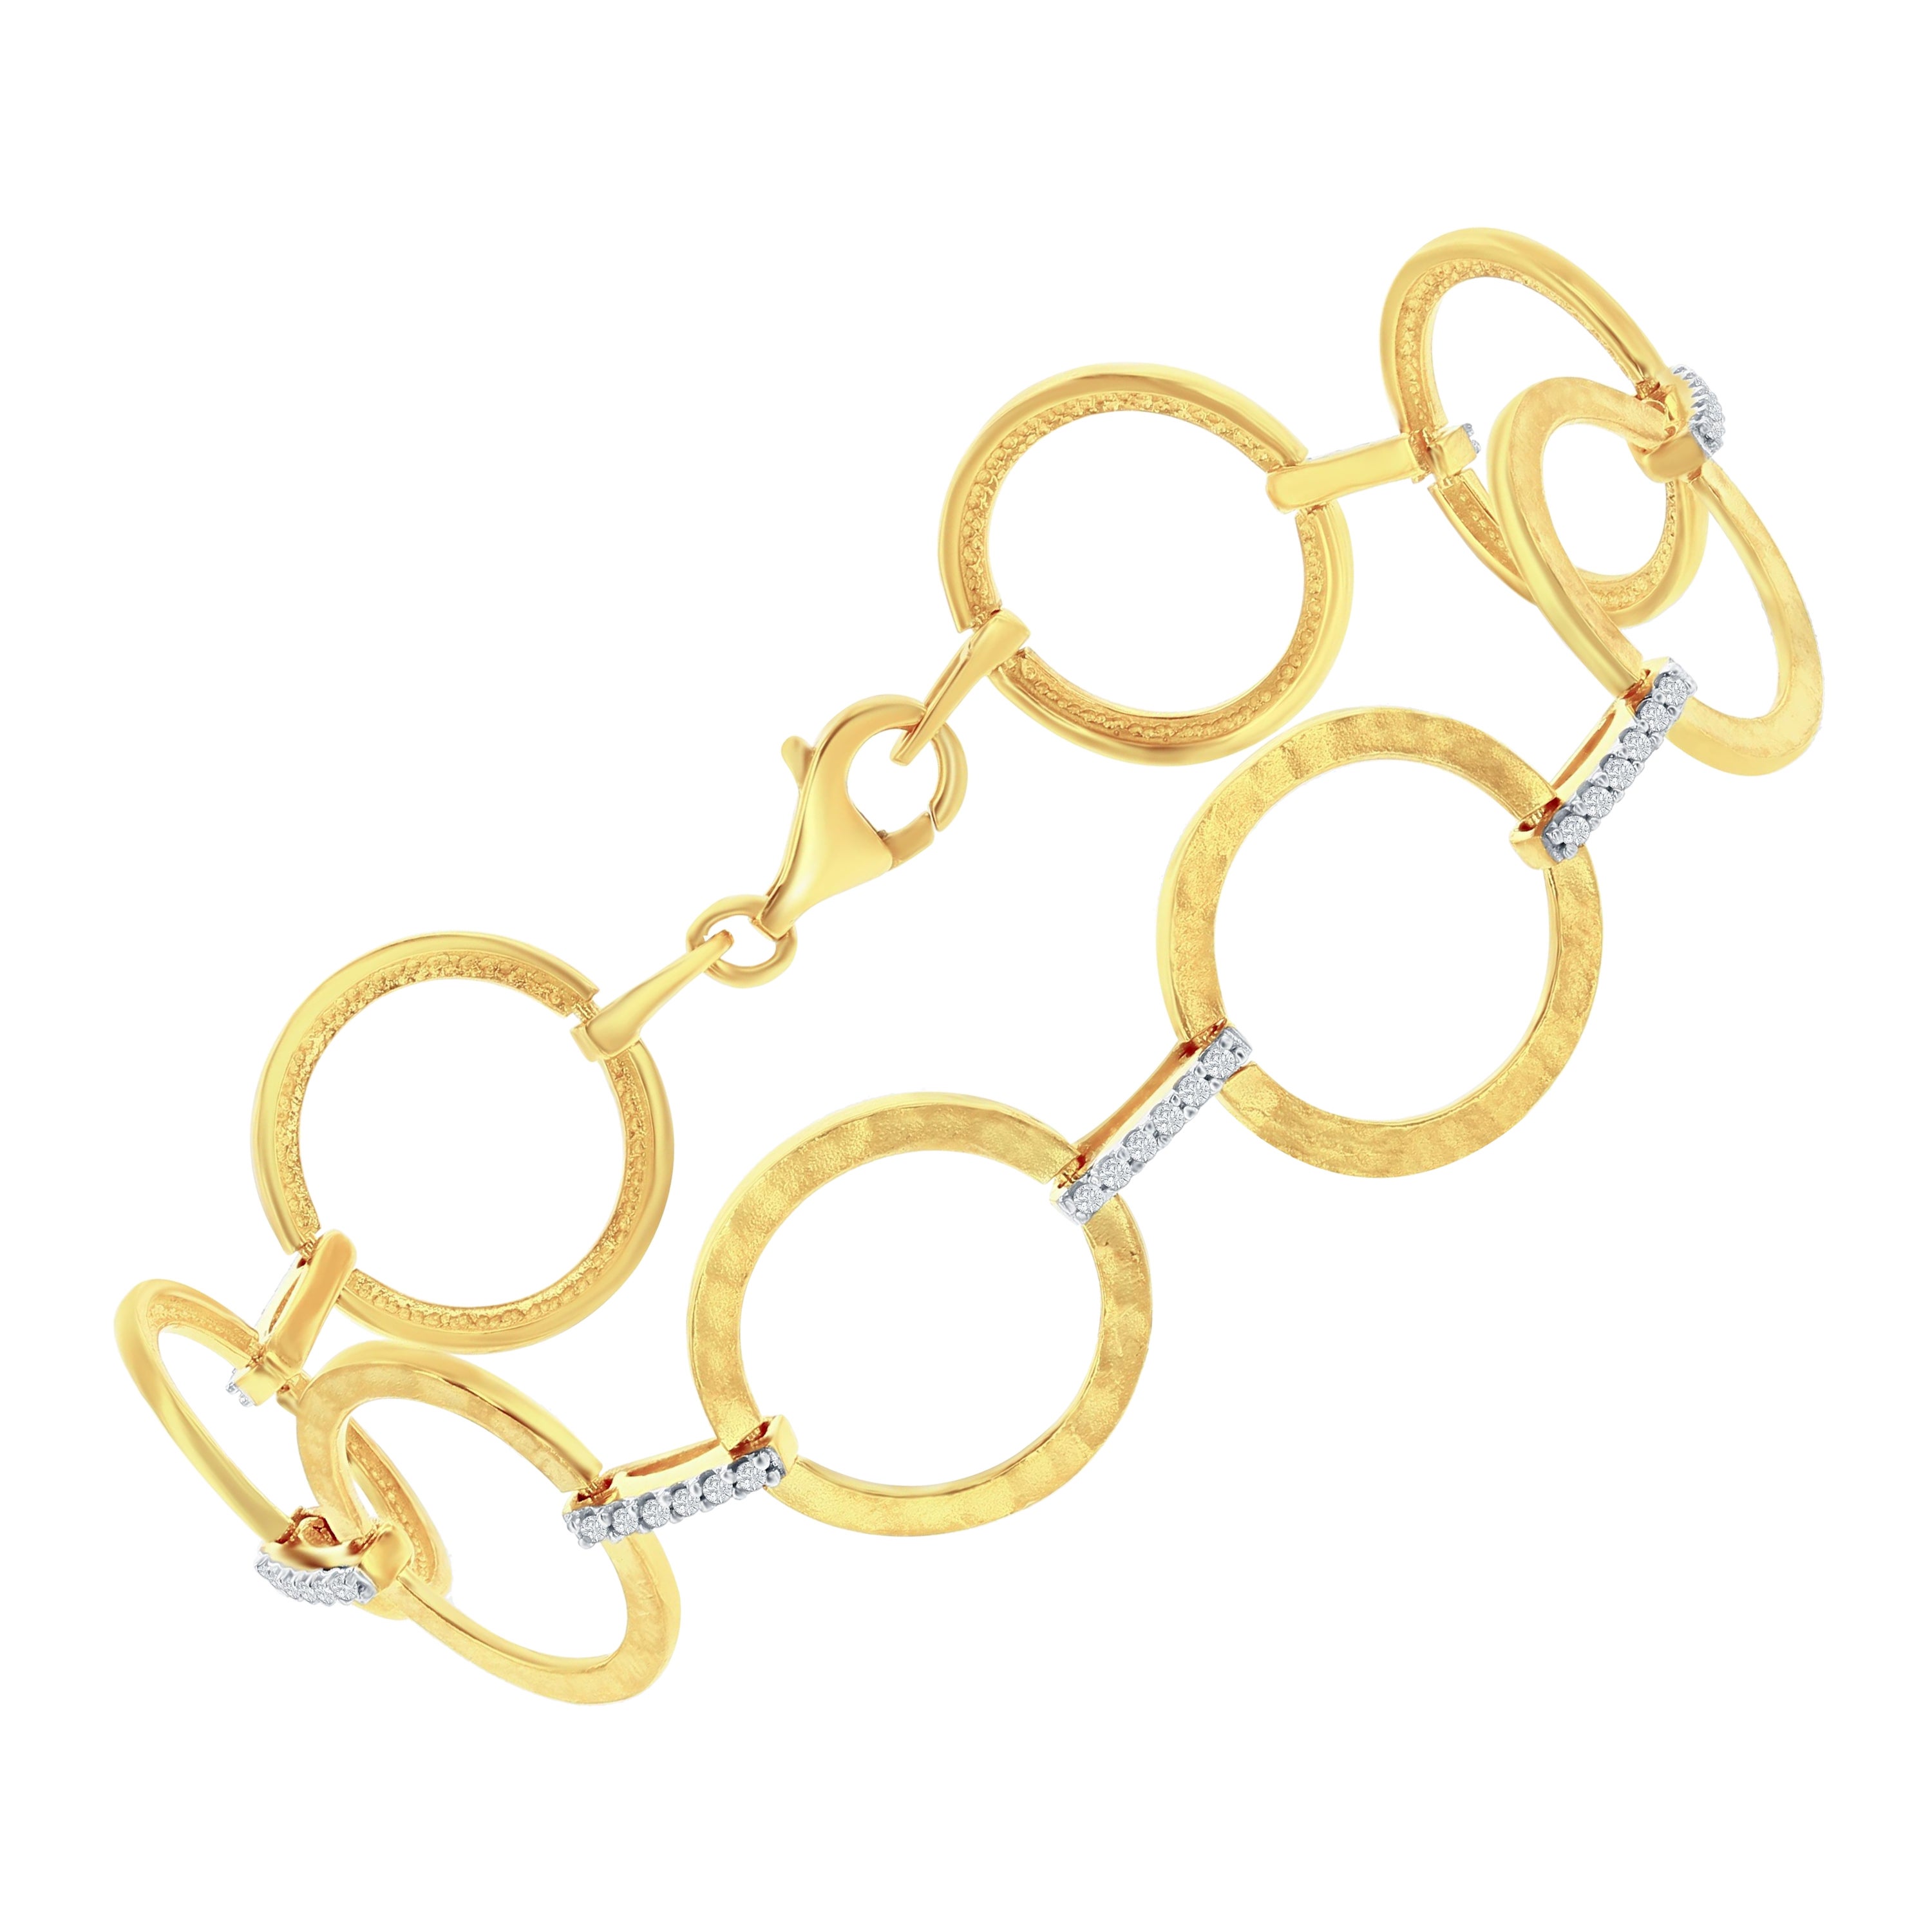 Hand-Crafted 14k Yellow Gold Open Circle Link Bracelet